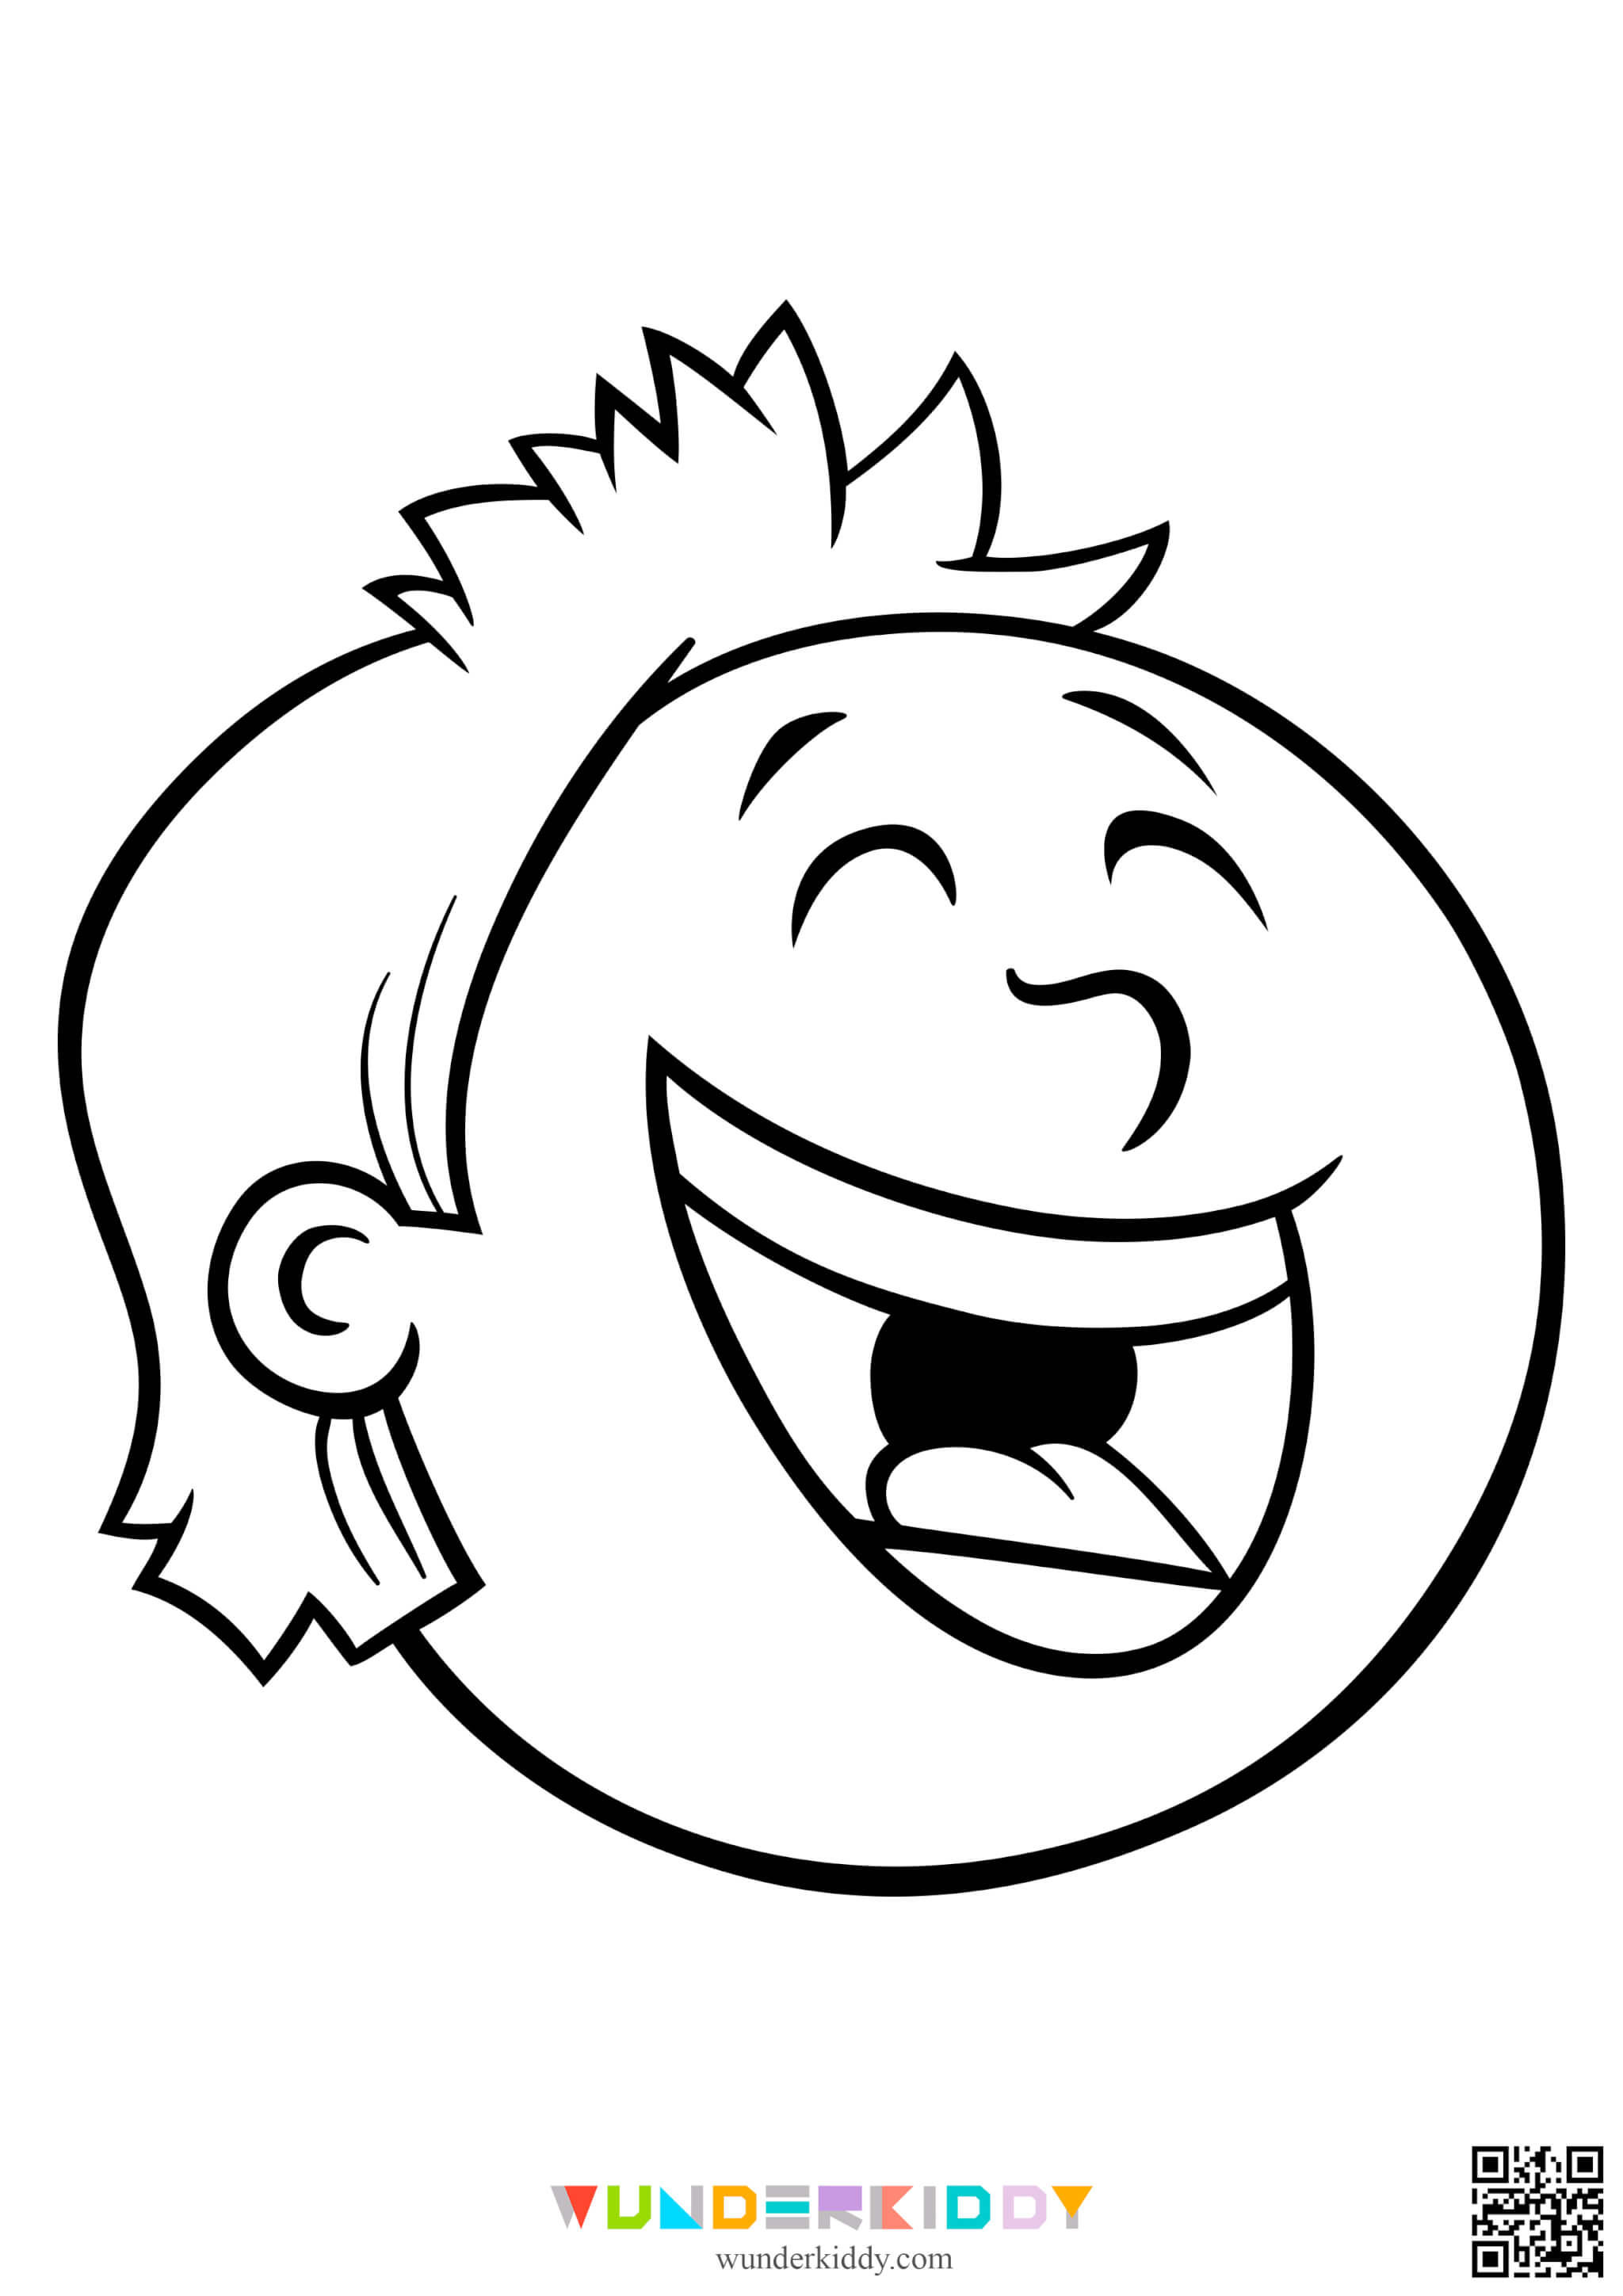 Face Coloring Page - Image 8